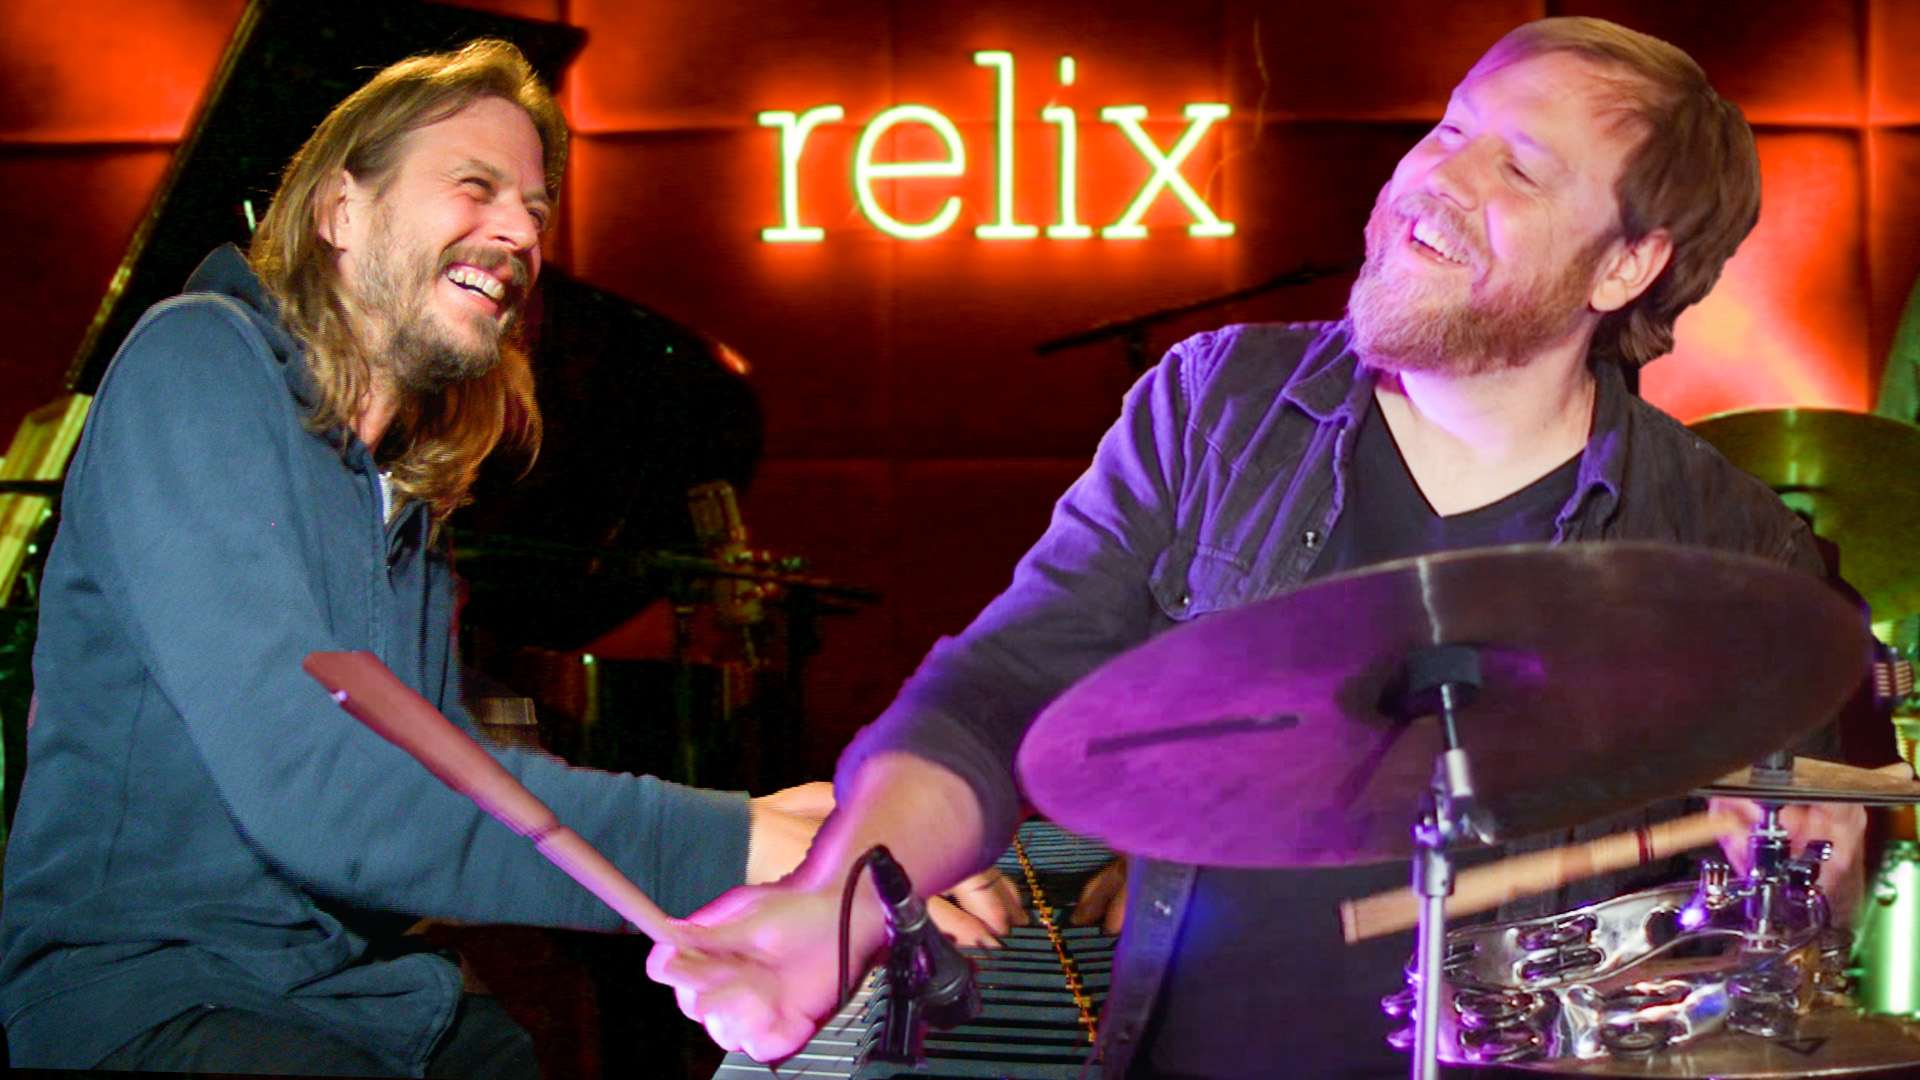 ICYMI: Watch Benevento/Russo Duo’s Pop-Up Acoustic Set at Relix Studio